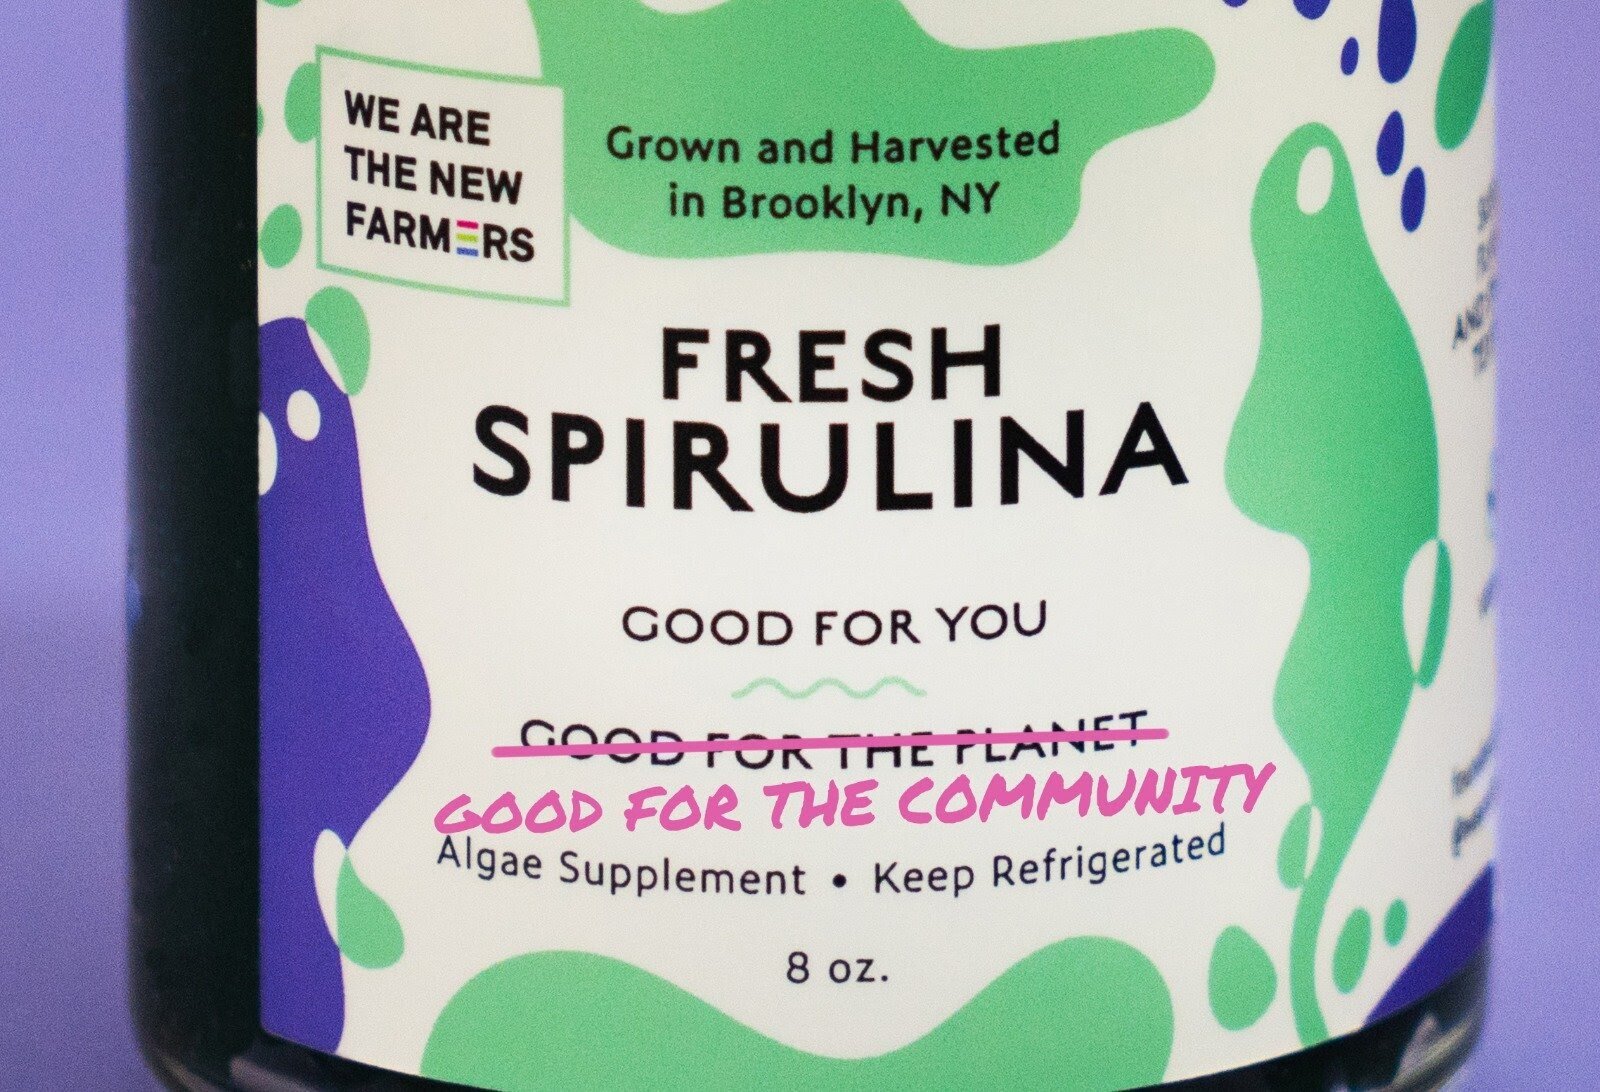 Image: We Are The New Farmers fresh Spirulina, courtesy of We Are The New Farmers